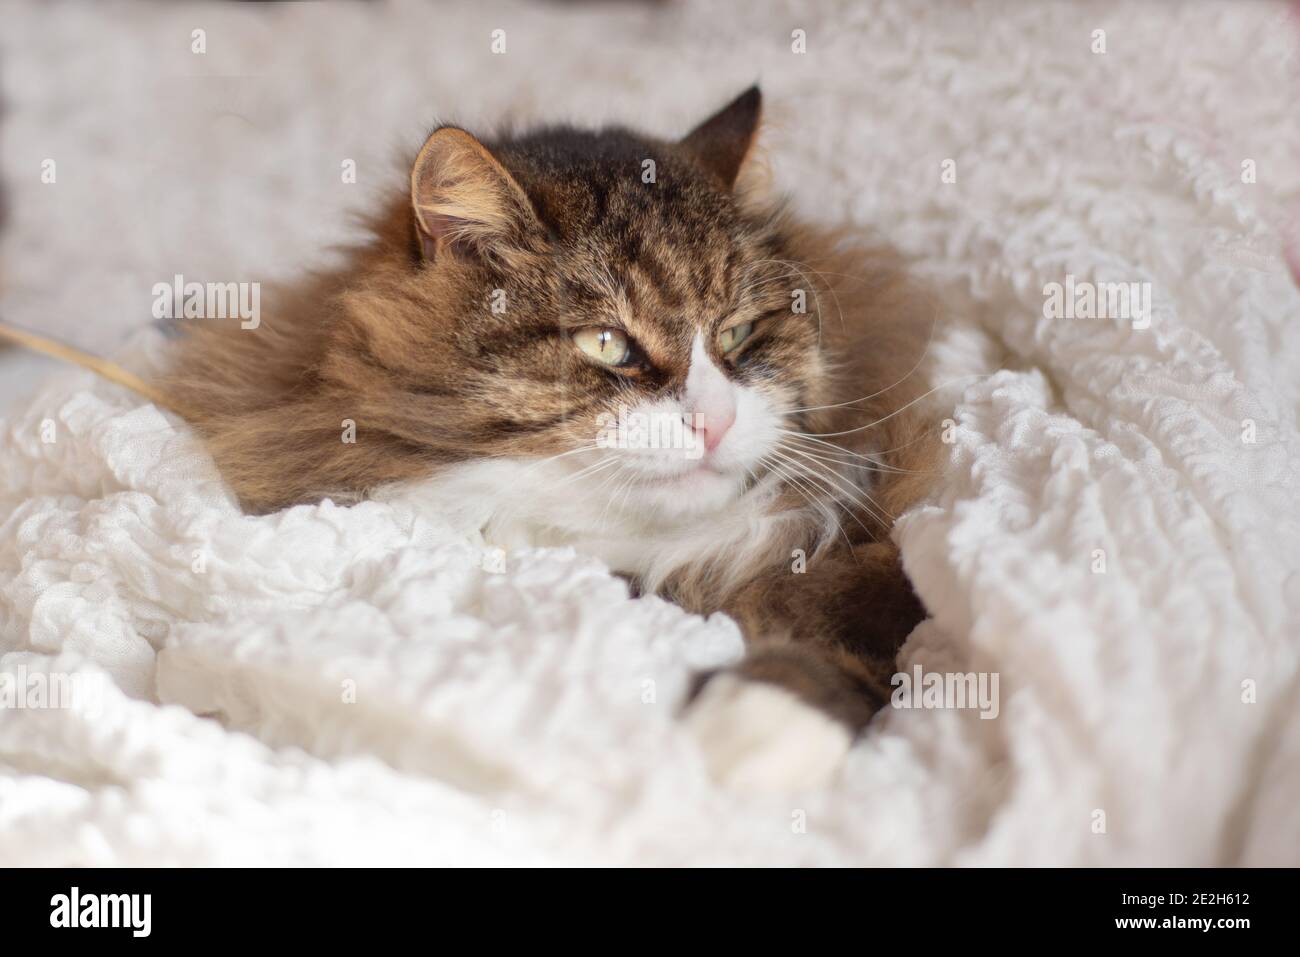 furry cat lying on a white blanket Stock Photo